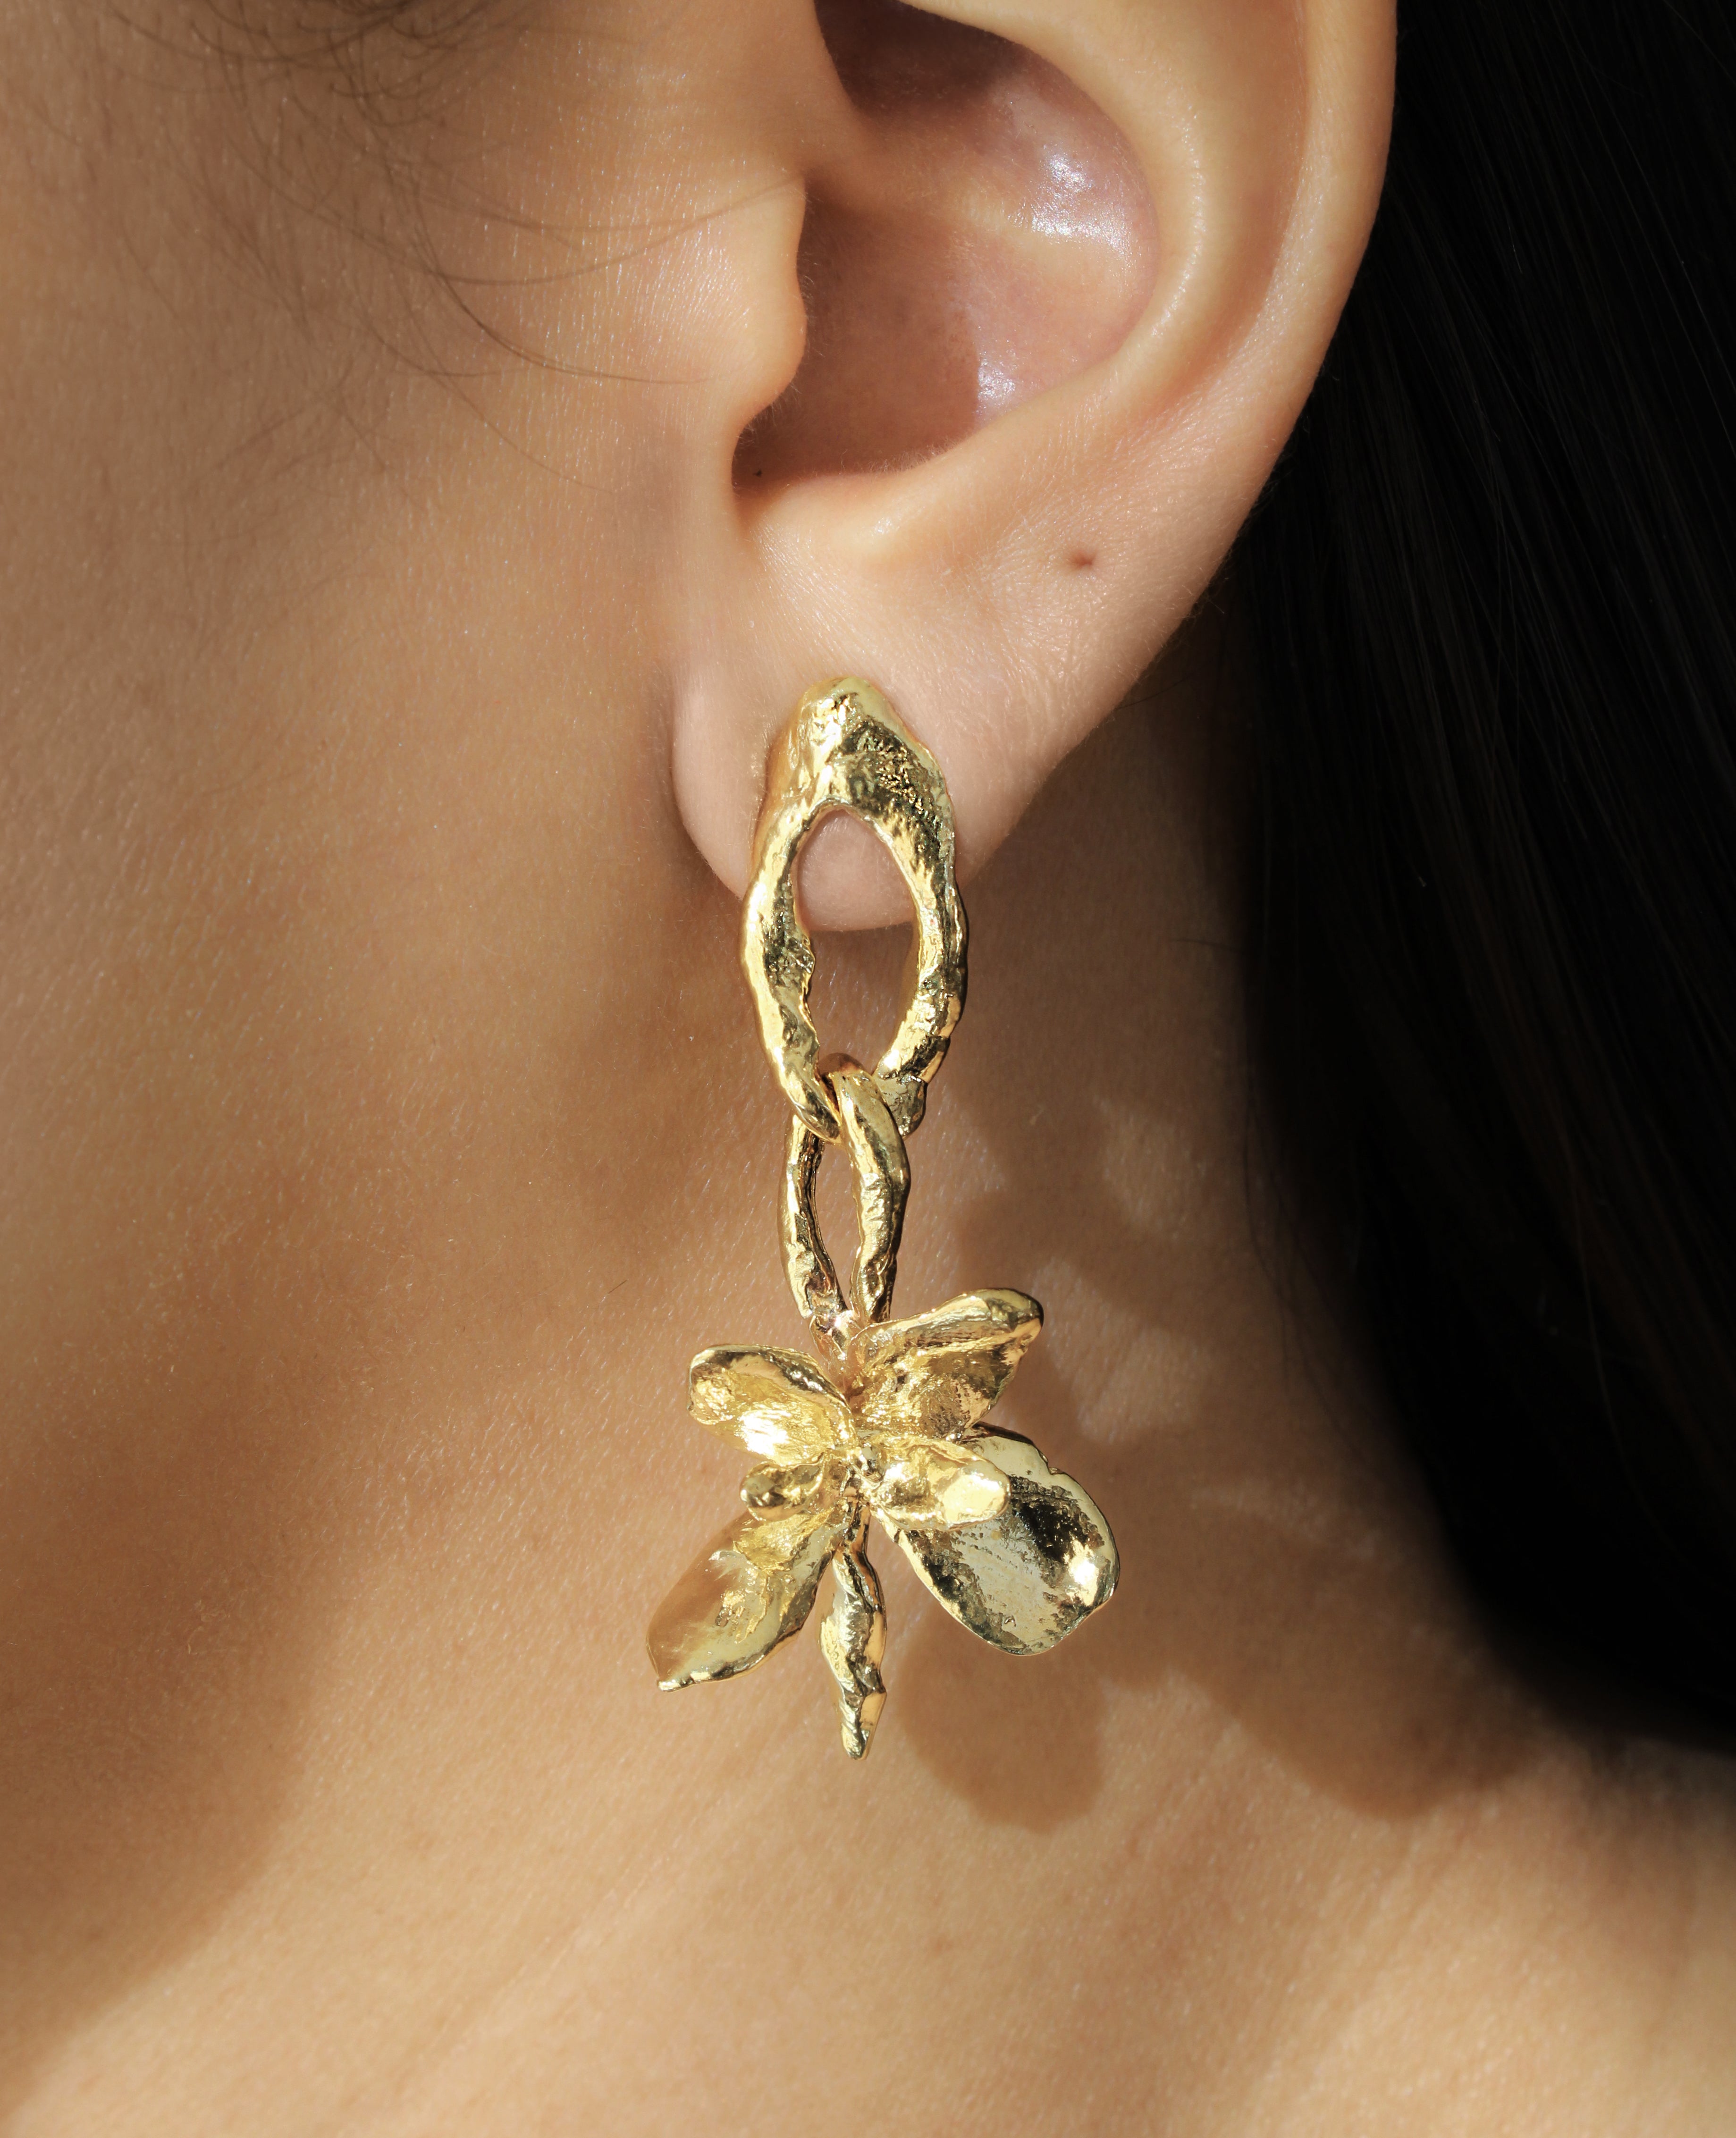 CHUNKY LILIES // golden earrings - ORA-C jewelry - handmade jewelry by Montreal based independent designer Caroline Pham